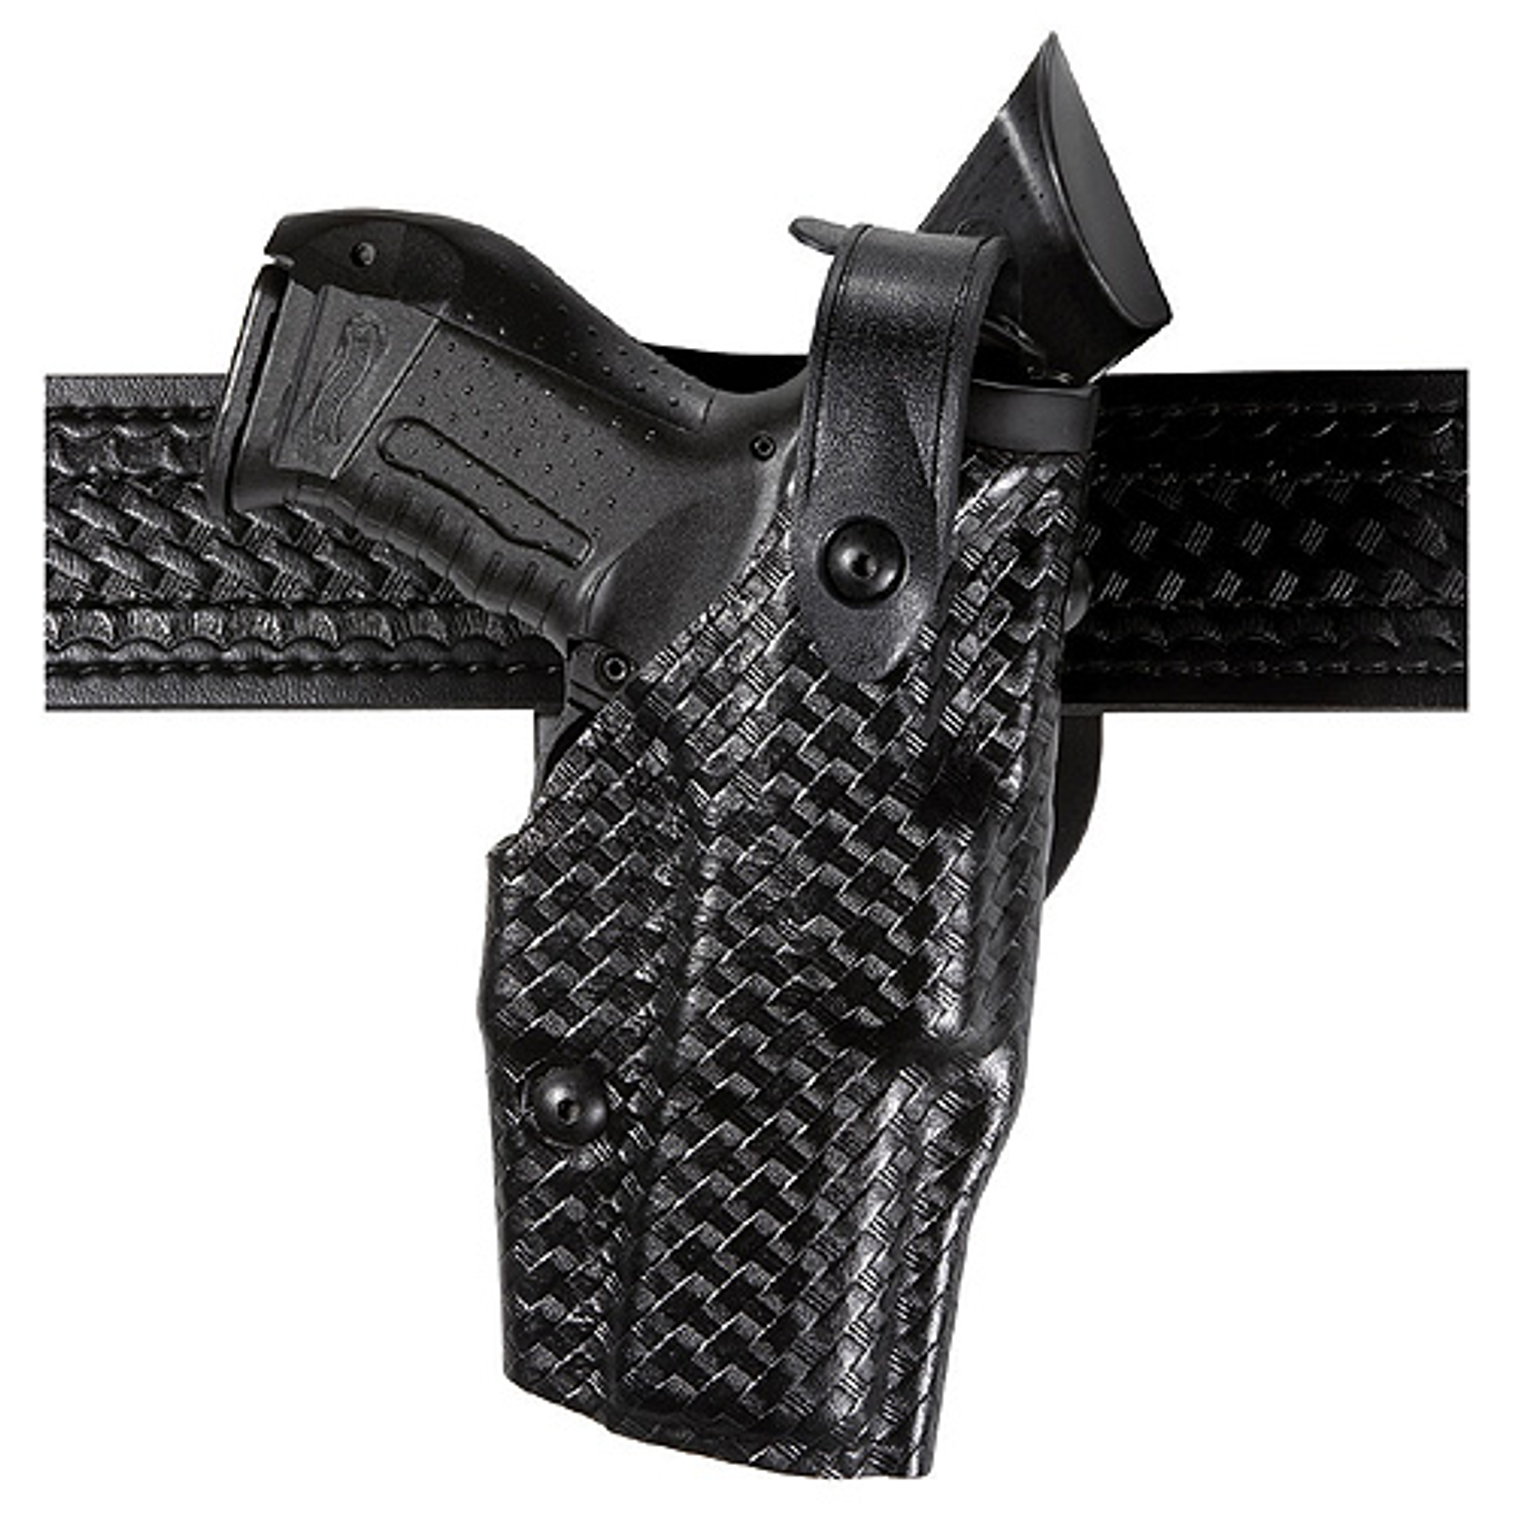 Model 6360 Als/sls Mid-ride, Level Iii Retention Duty Holster For Fn Fns 40